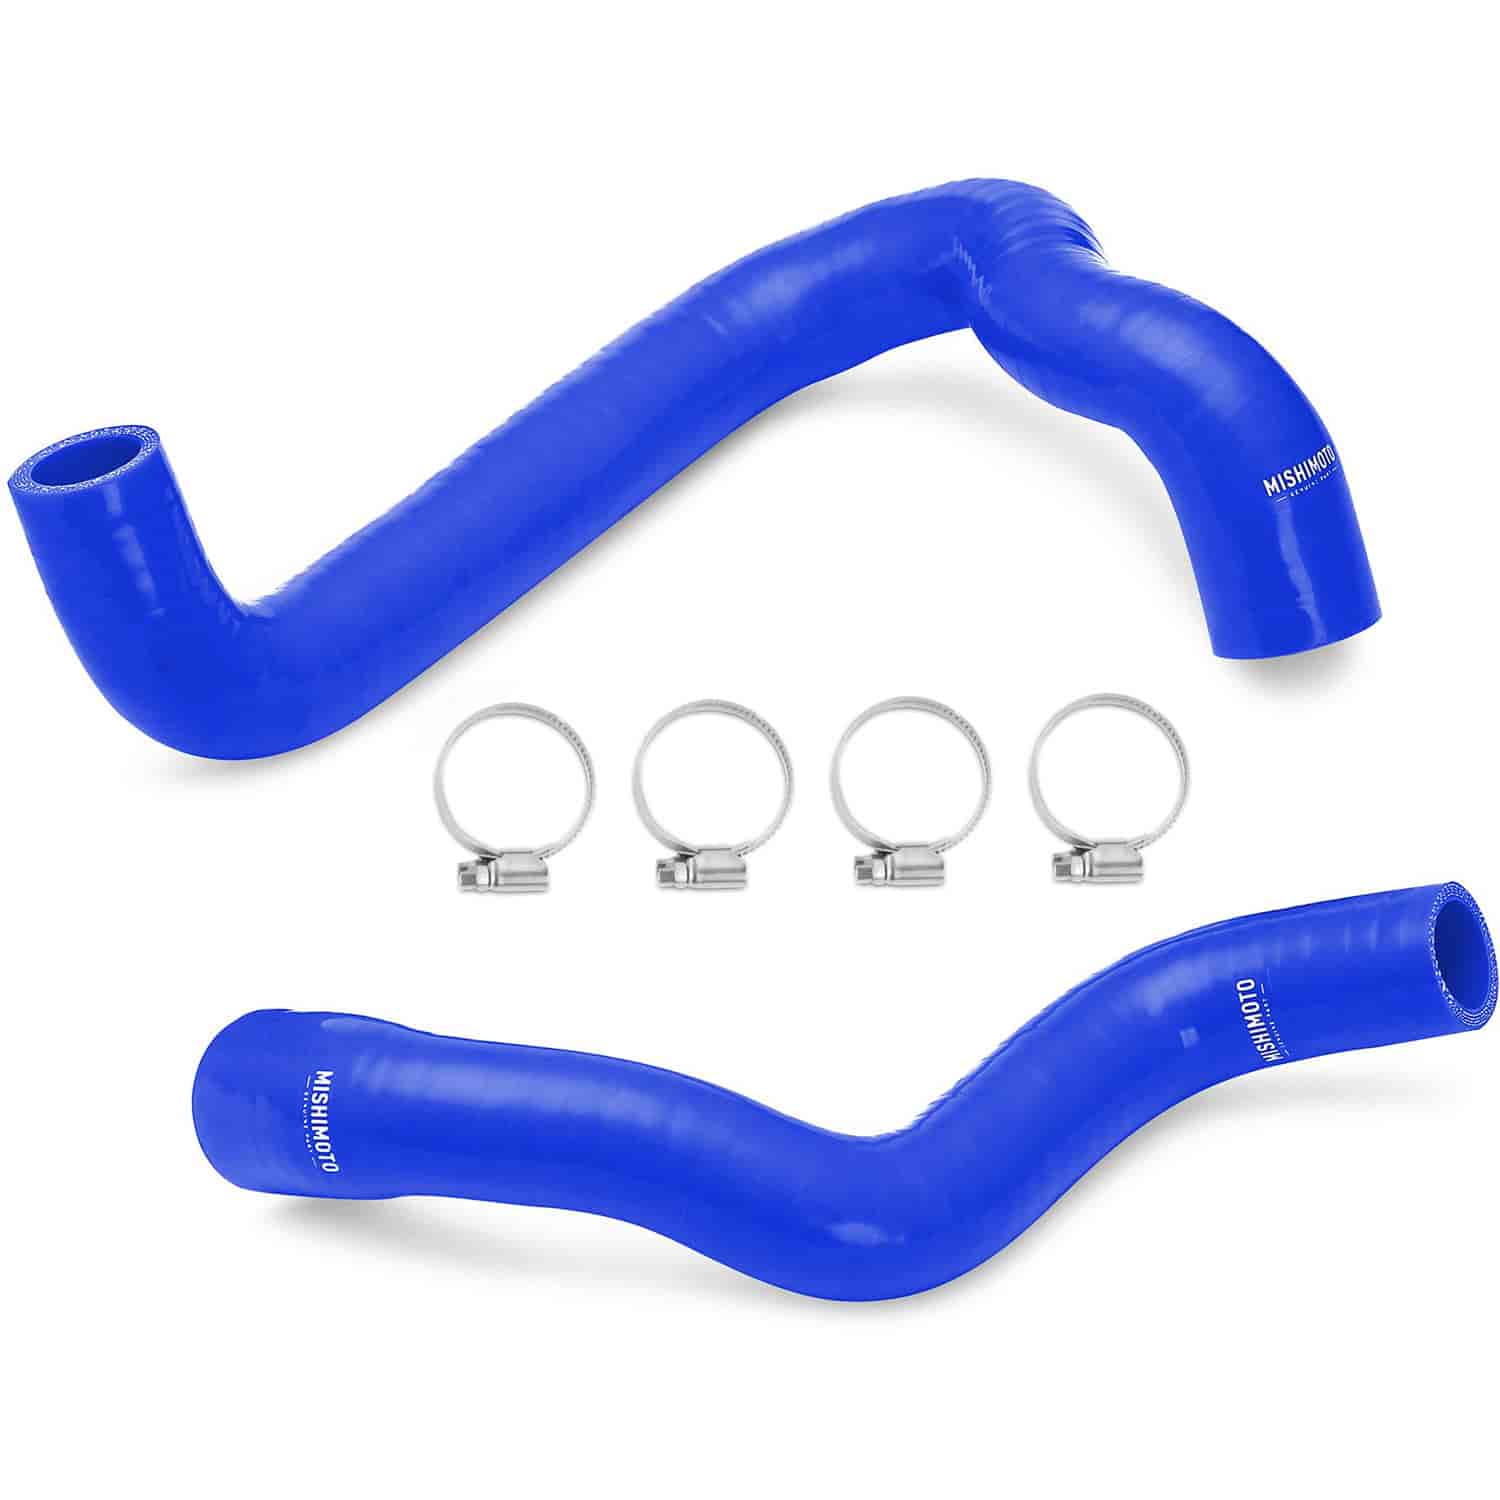 Ford Fiesta ST Silicone Radiator Hose Kit - MFG Part No. MMHOSE-FIST-14BL